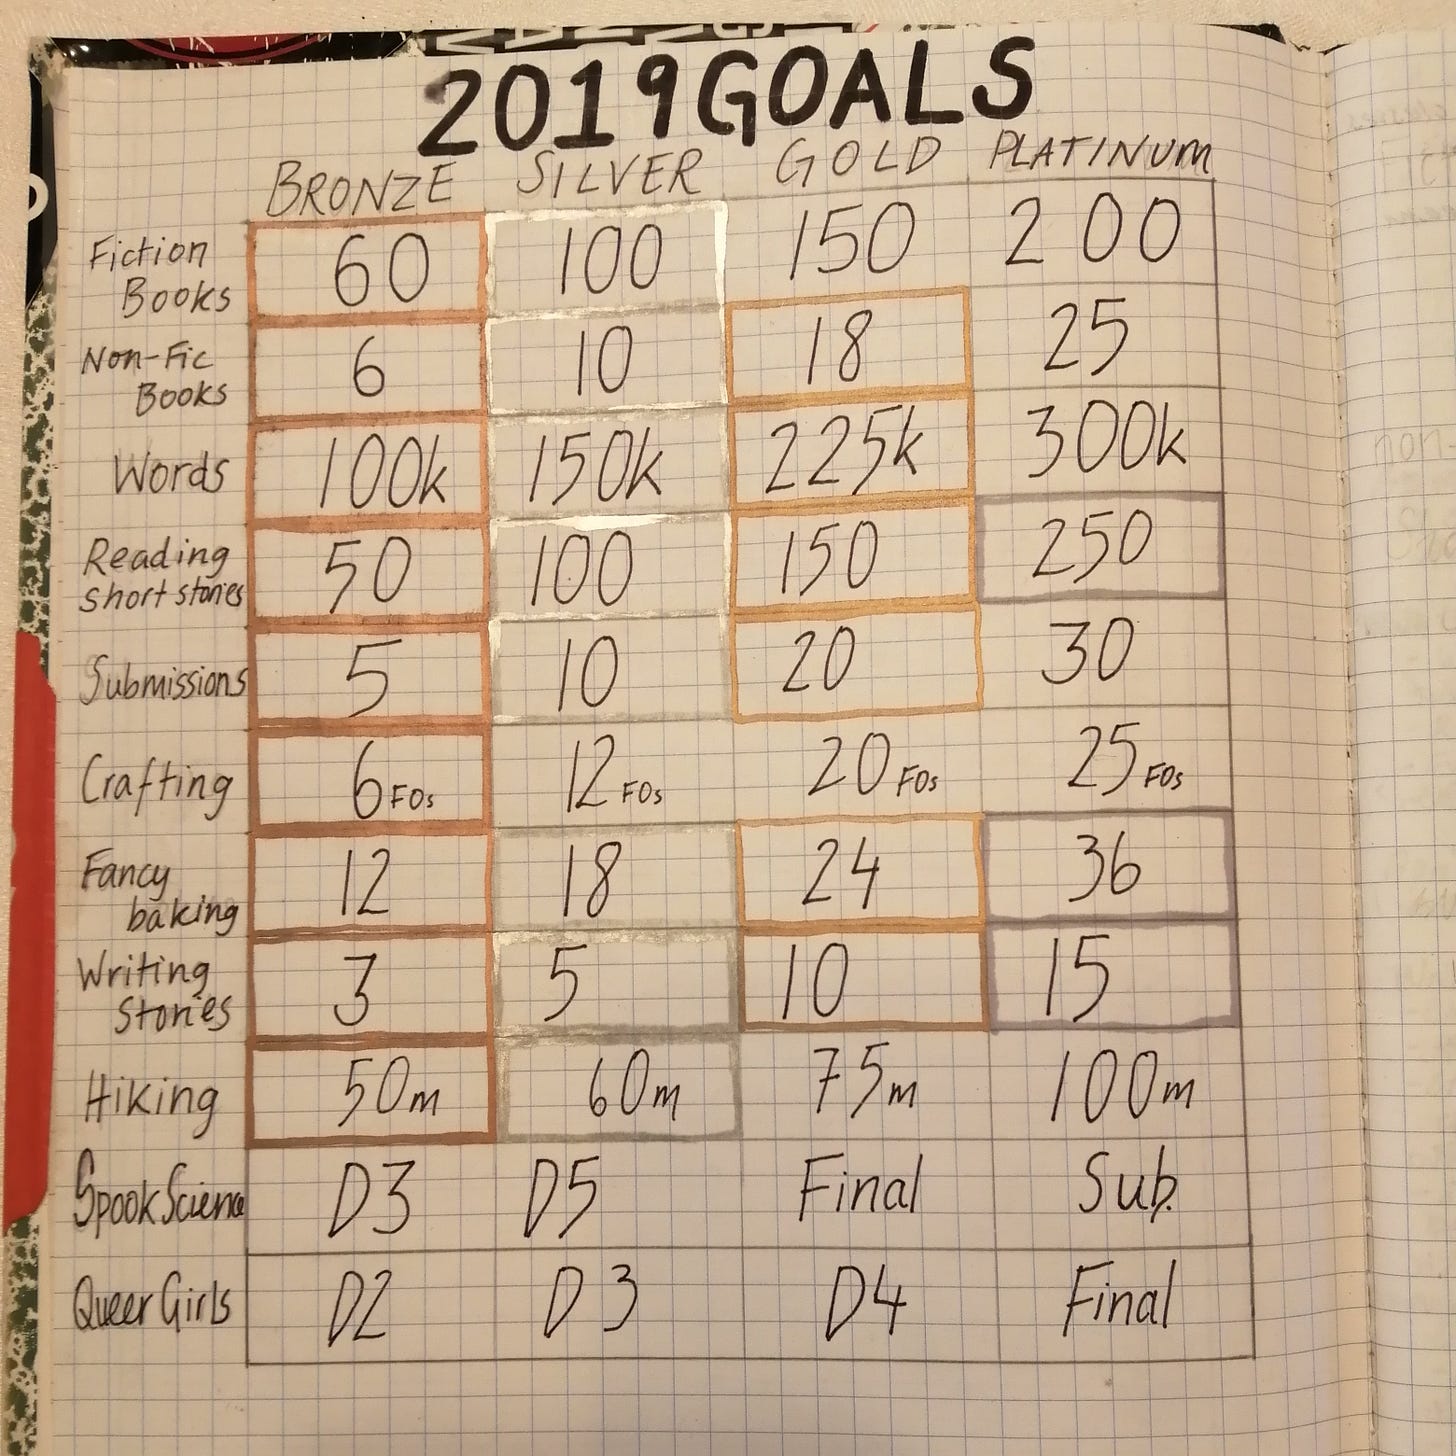 a chart entitled 2019 goals with "bronze, silver, gold and platinum" describing the horizontal columns, and the goals running down the vertical axis. The goals are "fiction books, non-fiction books, words, reading short stories, submissions, crafting, fancy baking, writing stories, hiking, spook science and quer girls"